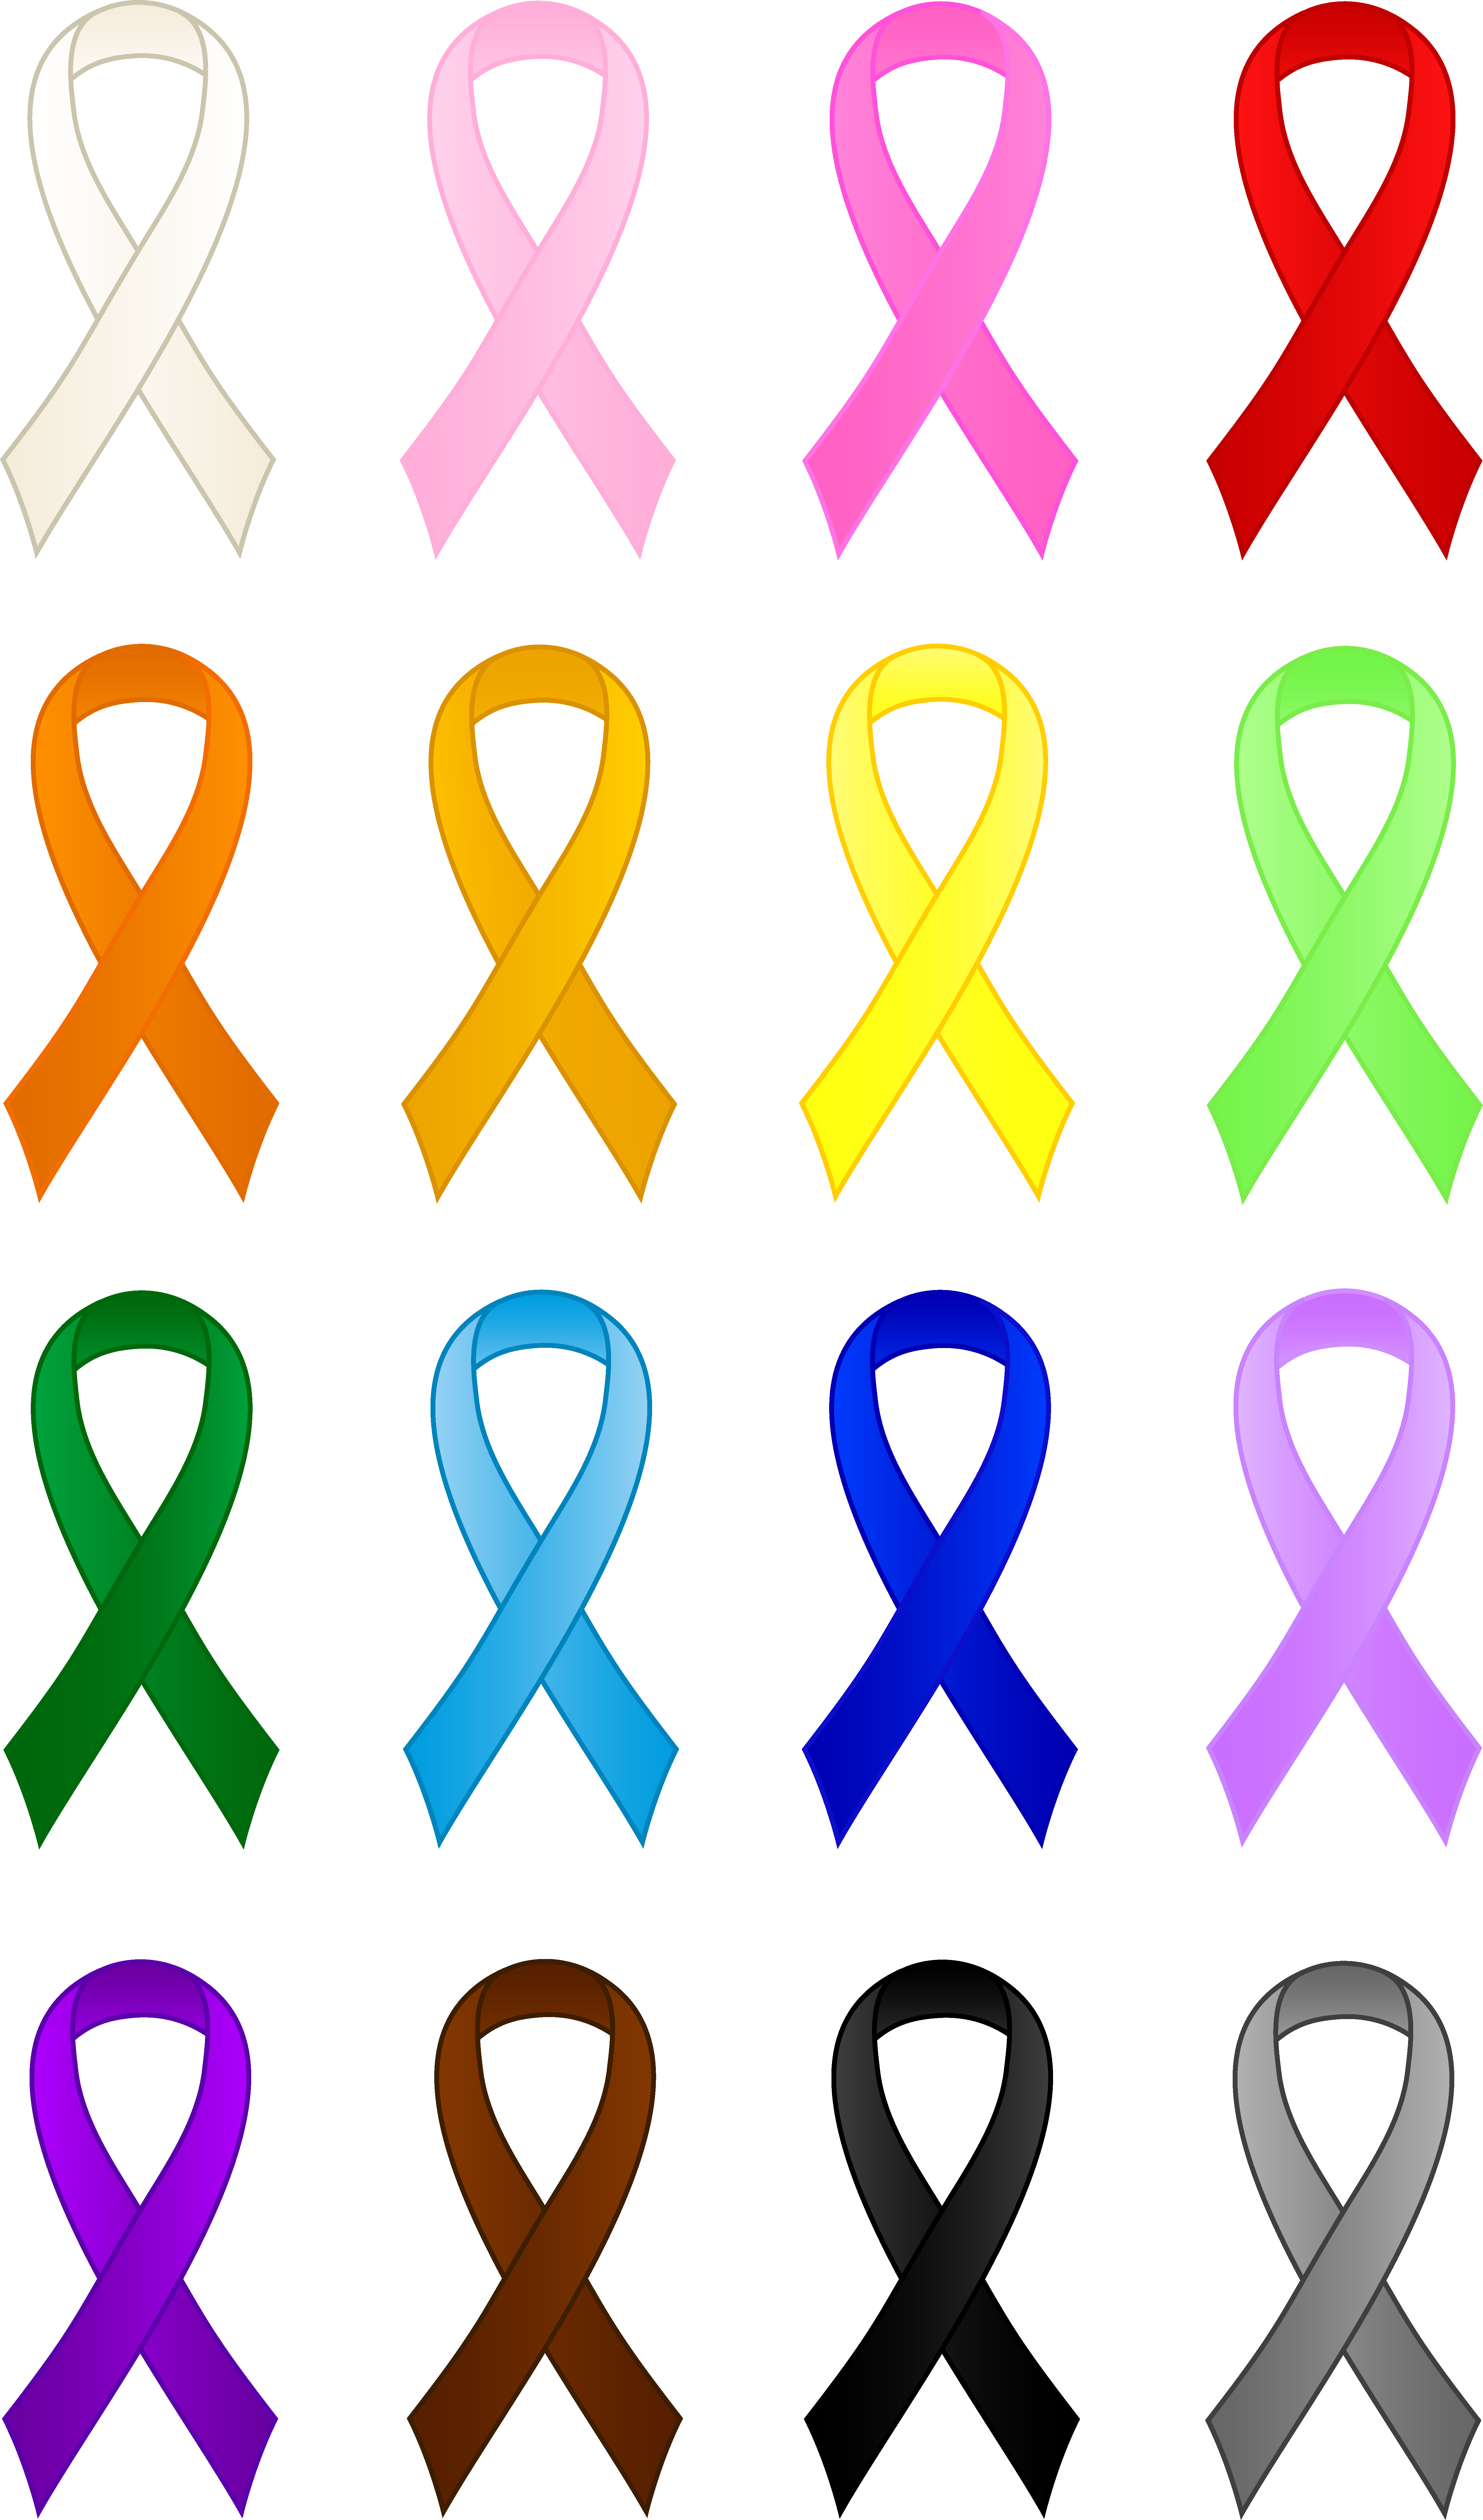 calendar-of-cancer-awareness-months-and-ribbon-colors-choose-hope